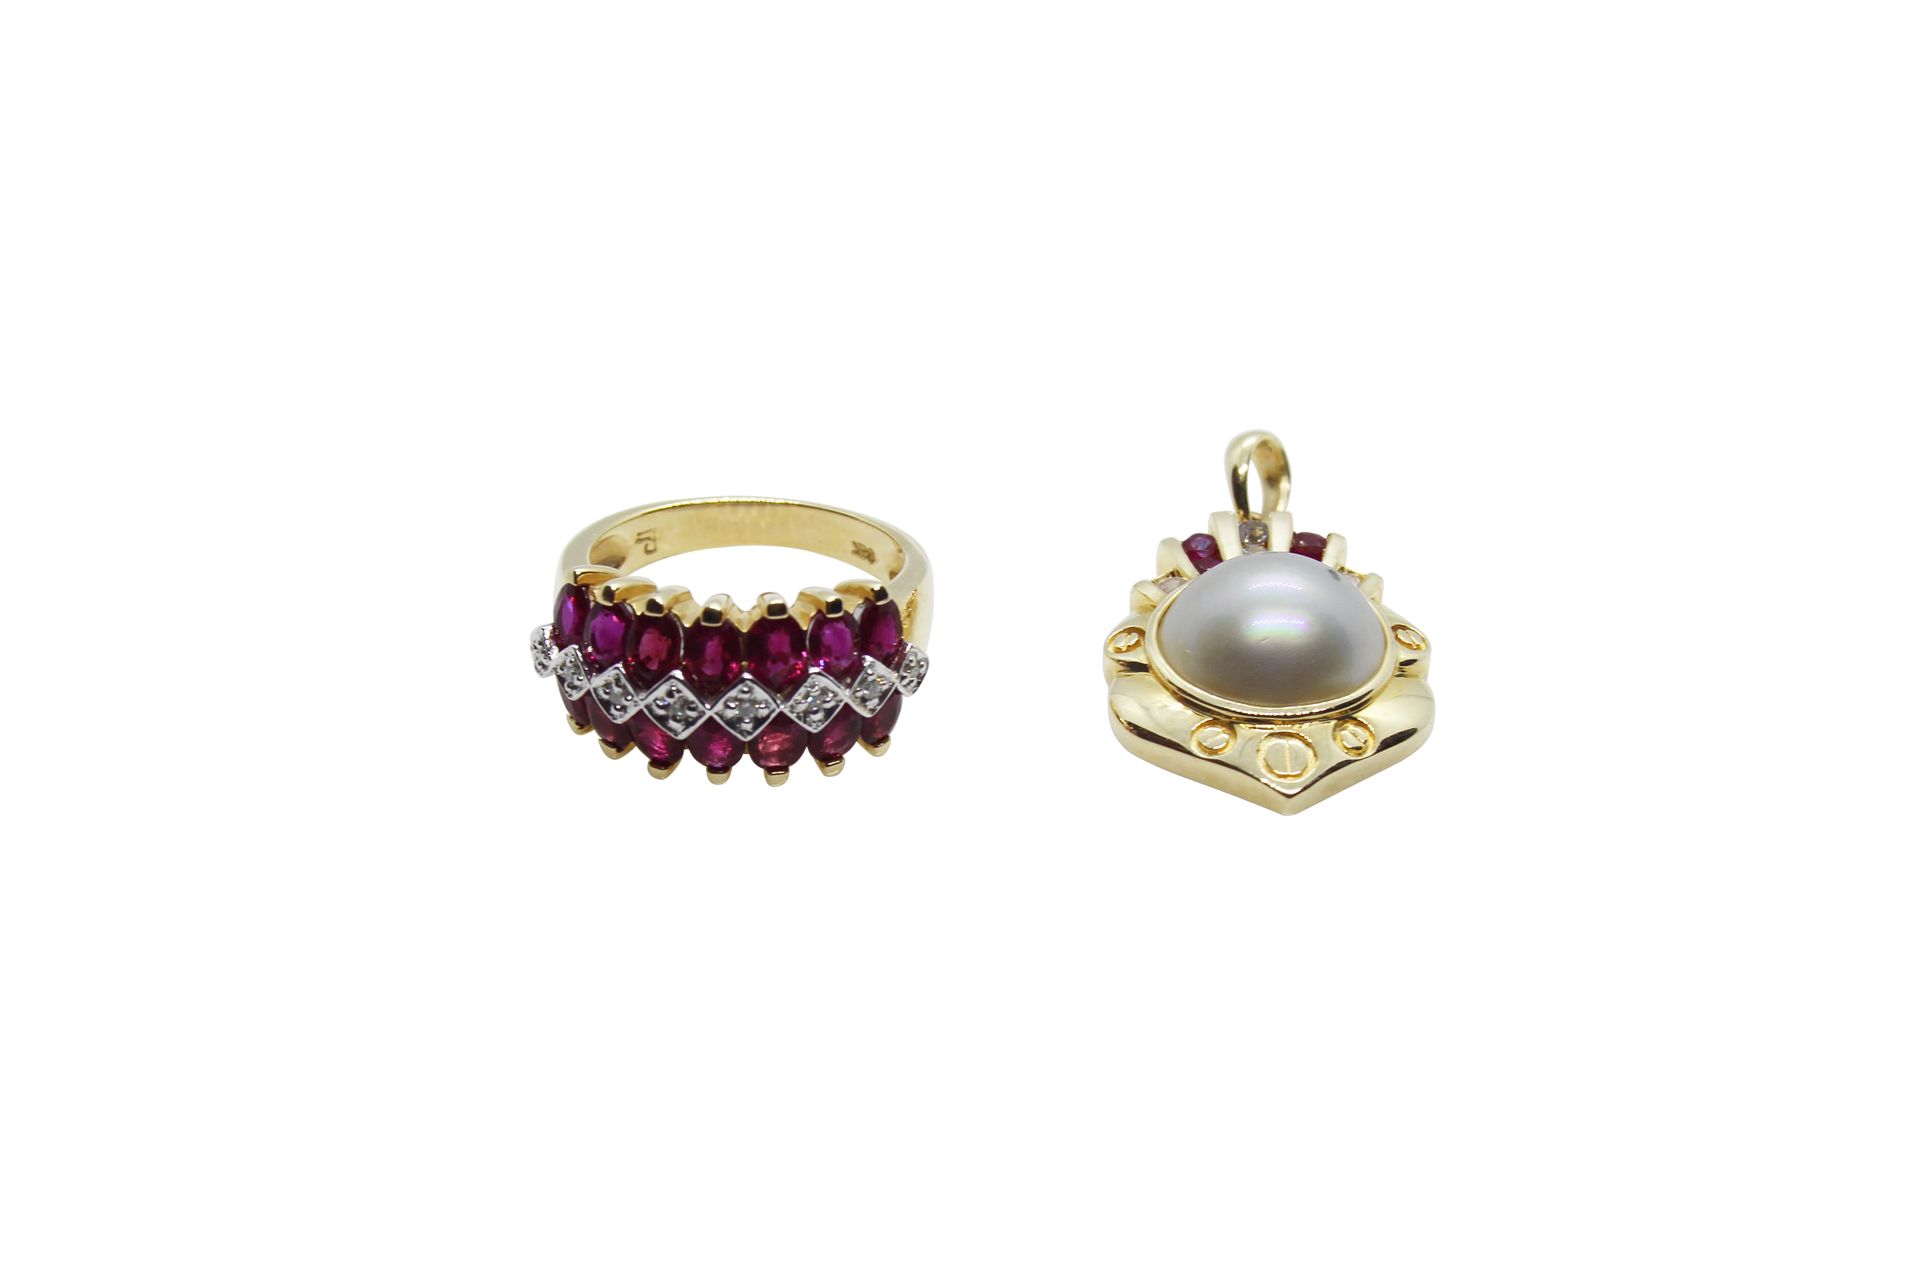 A jewellery lot comprising of a 14k gold ruby and diamond ring and a 14k gold ru&hellip;